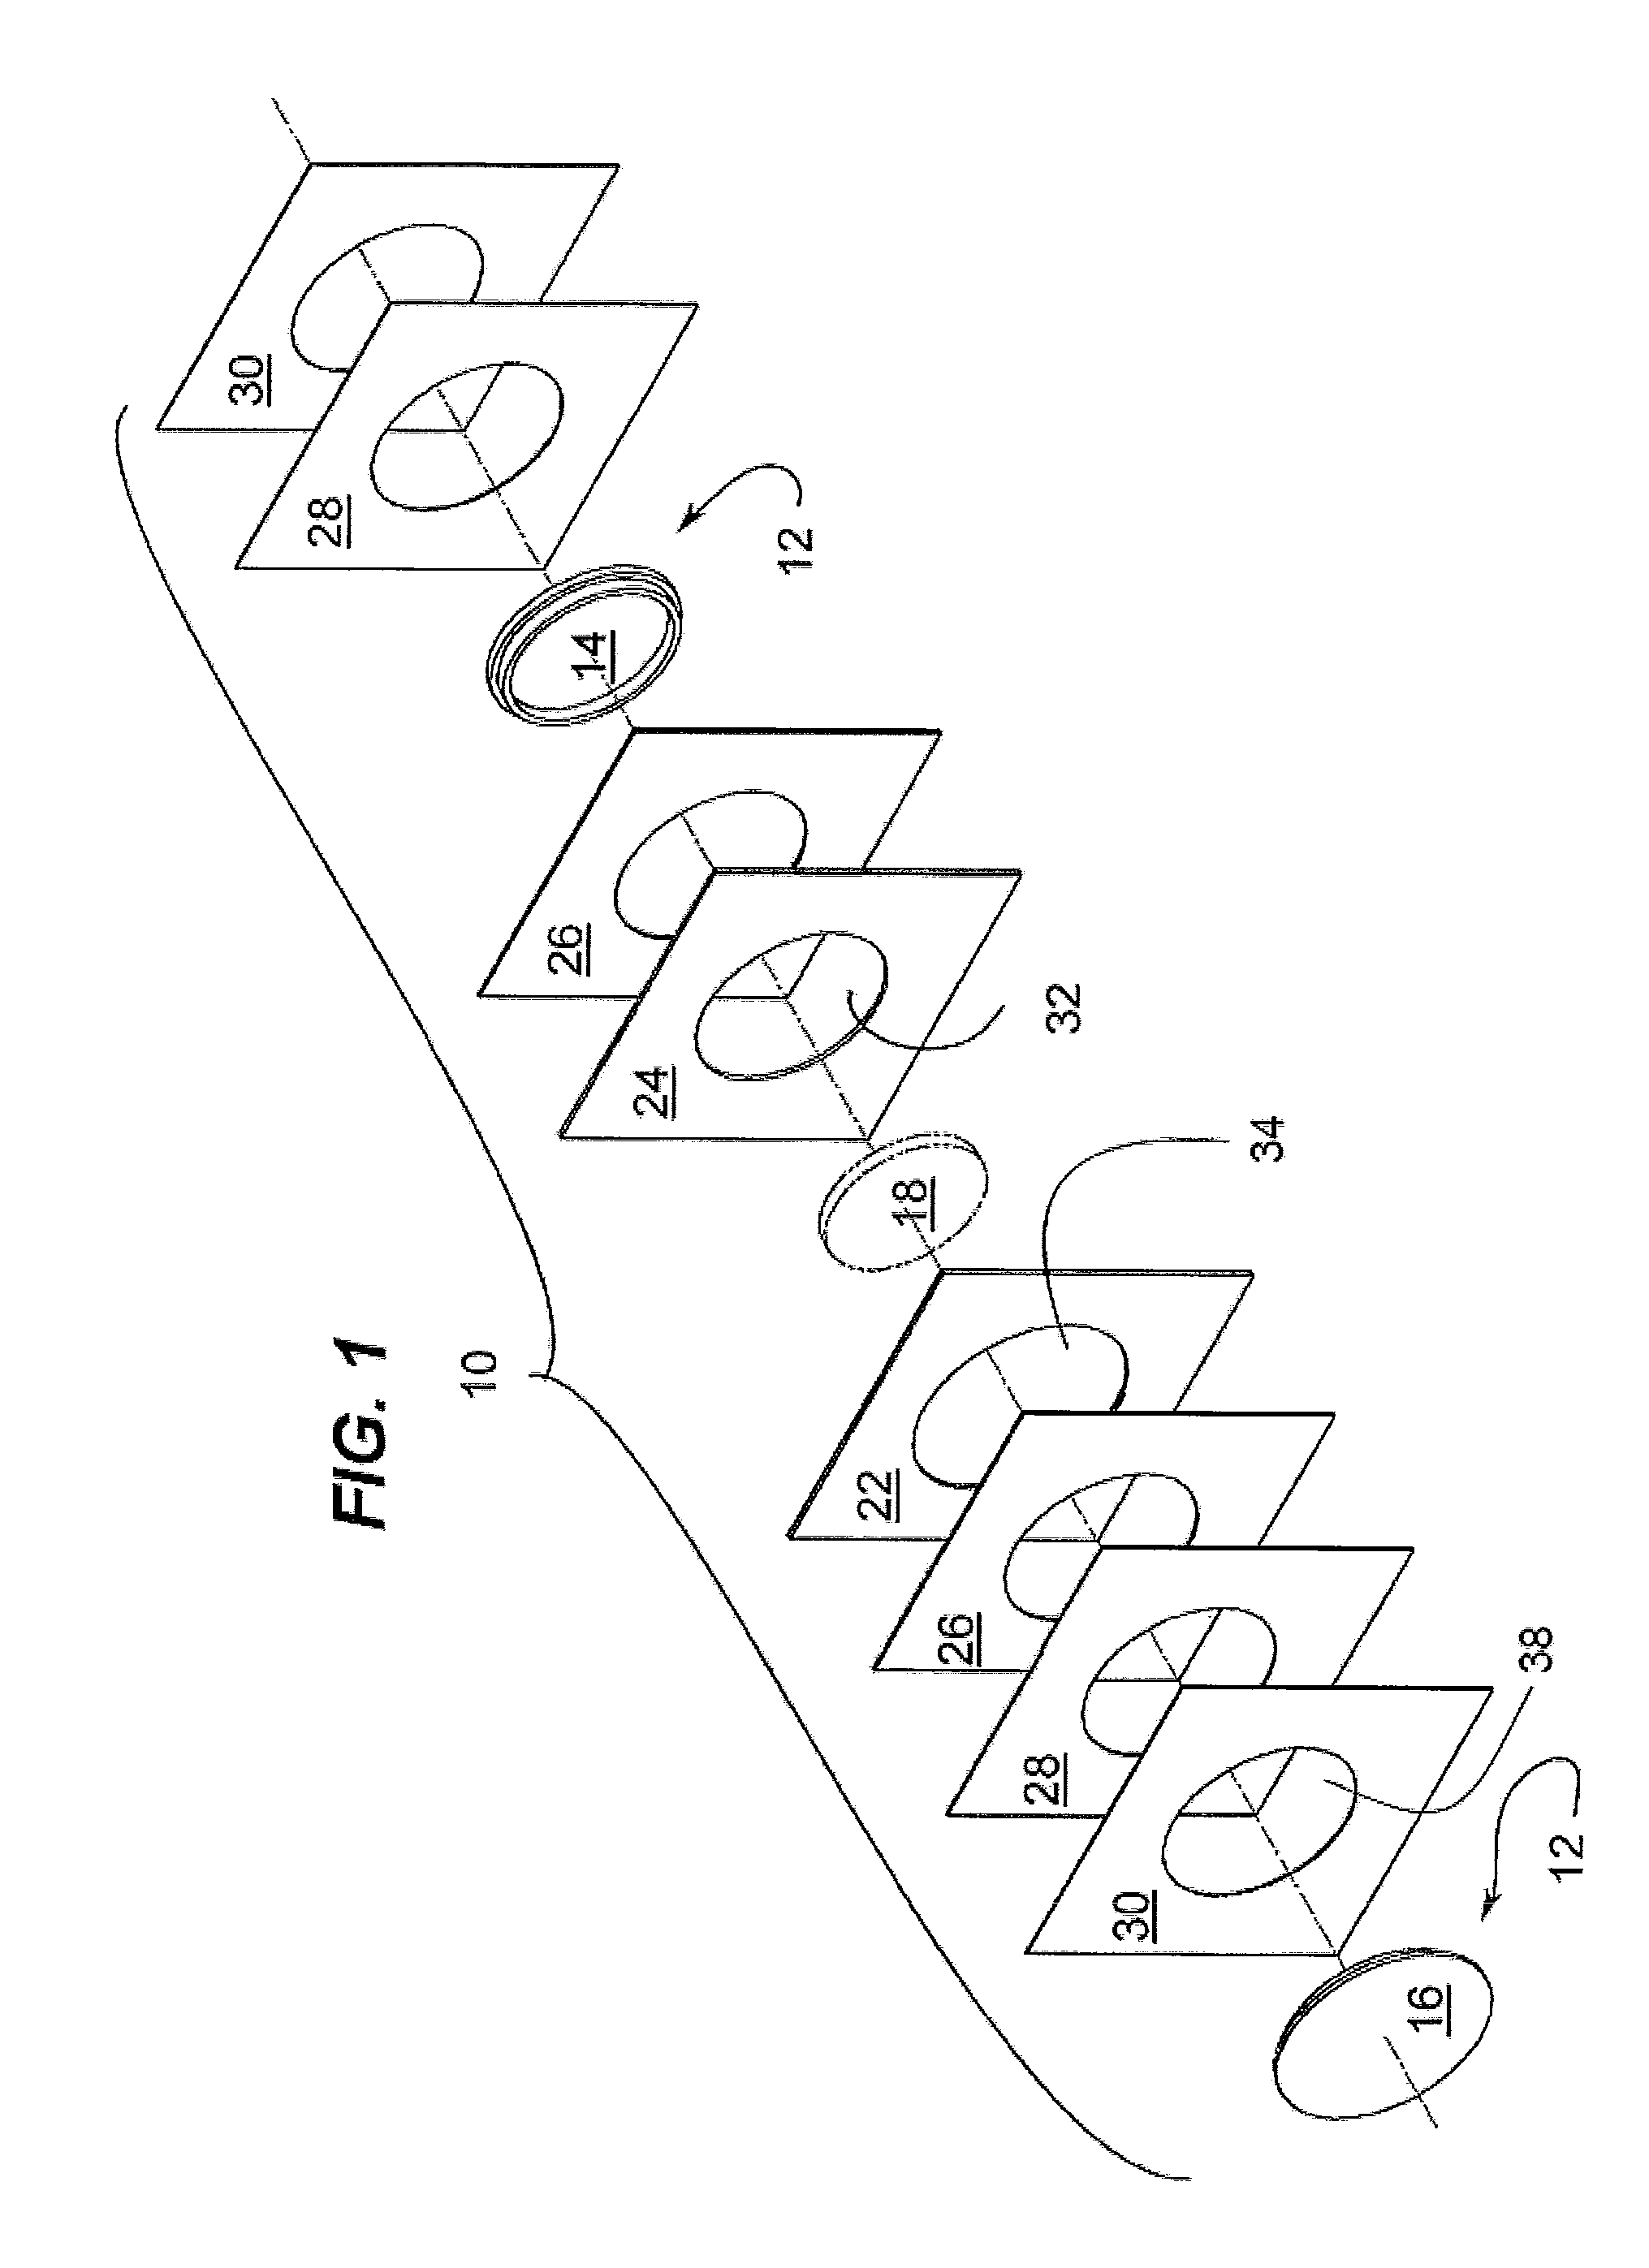 Resealable packaging device and method for packaging collectible items